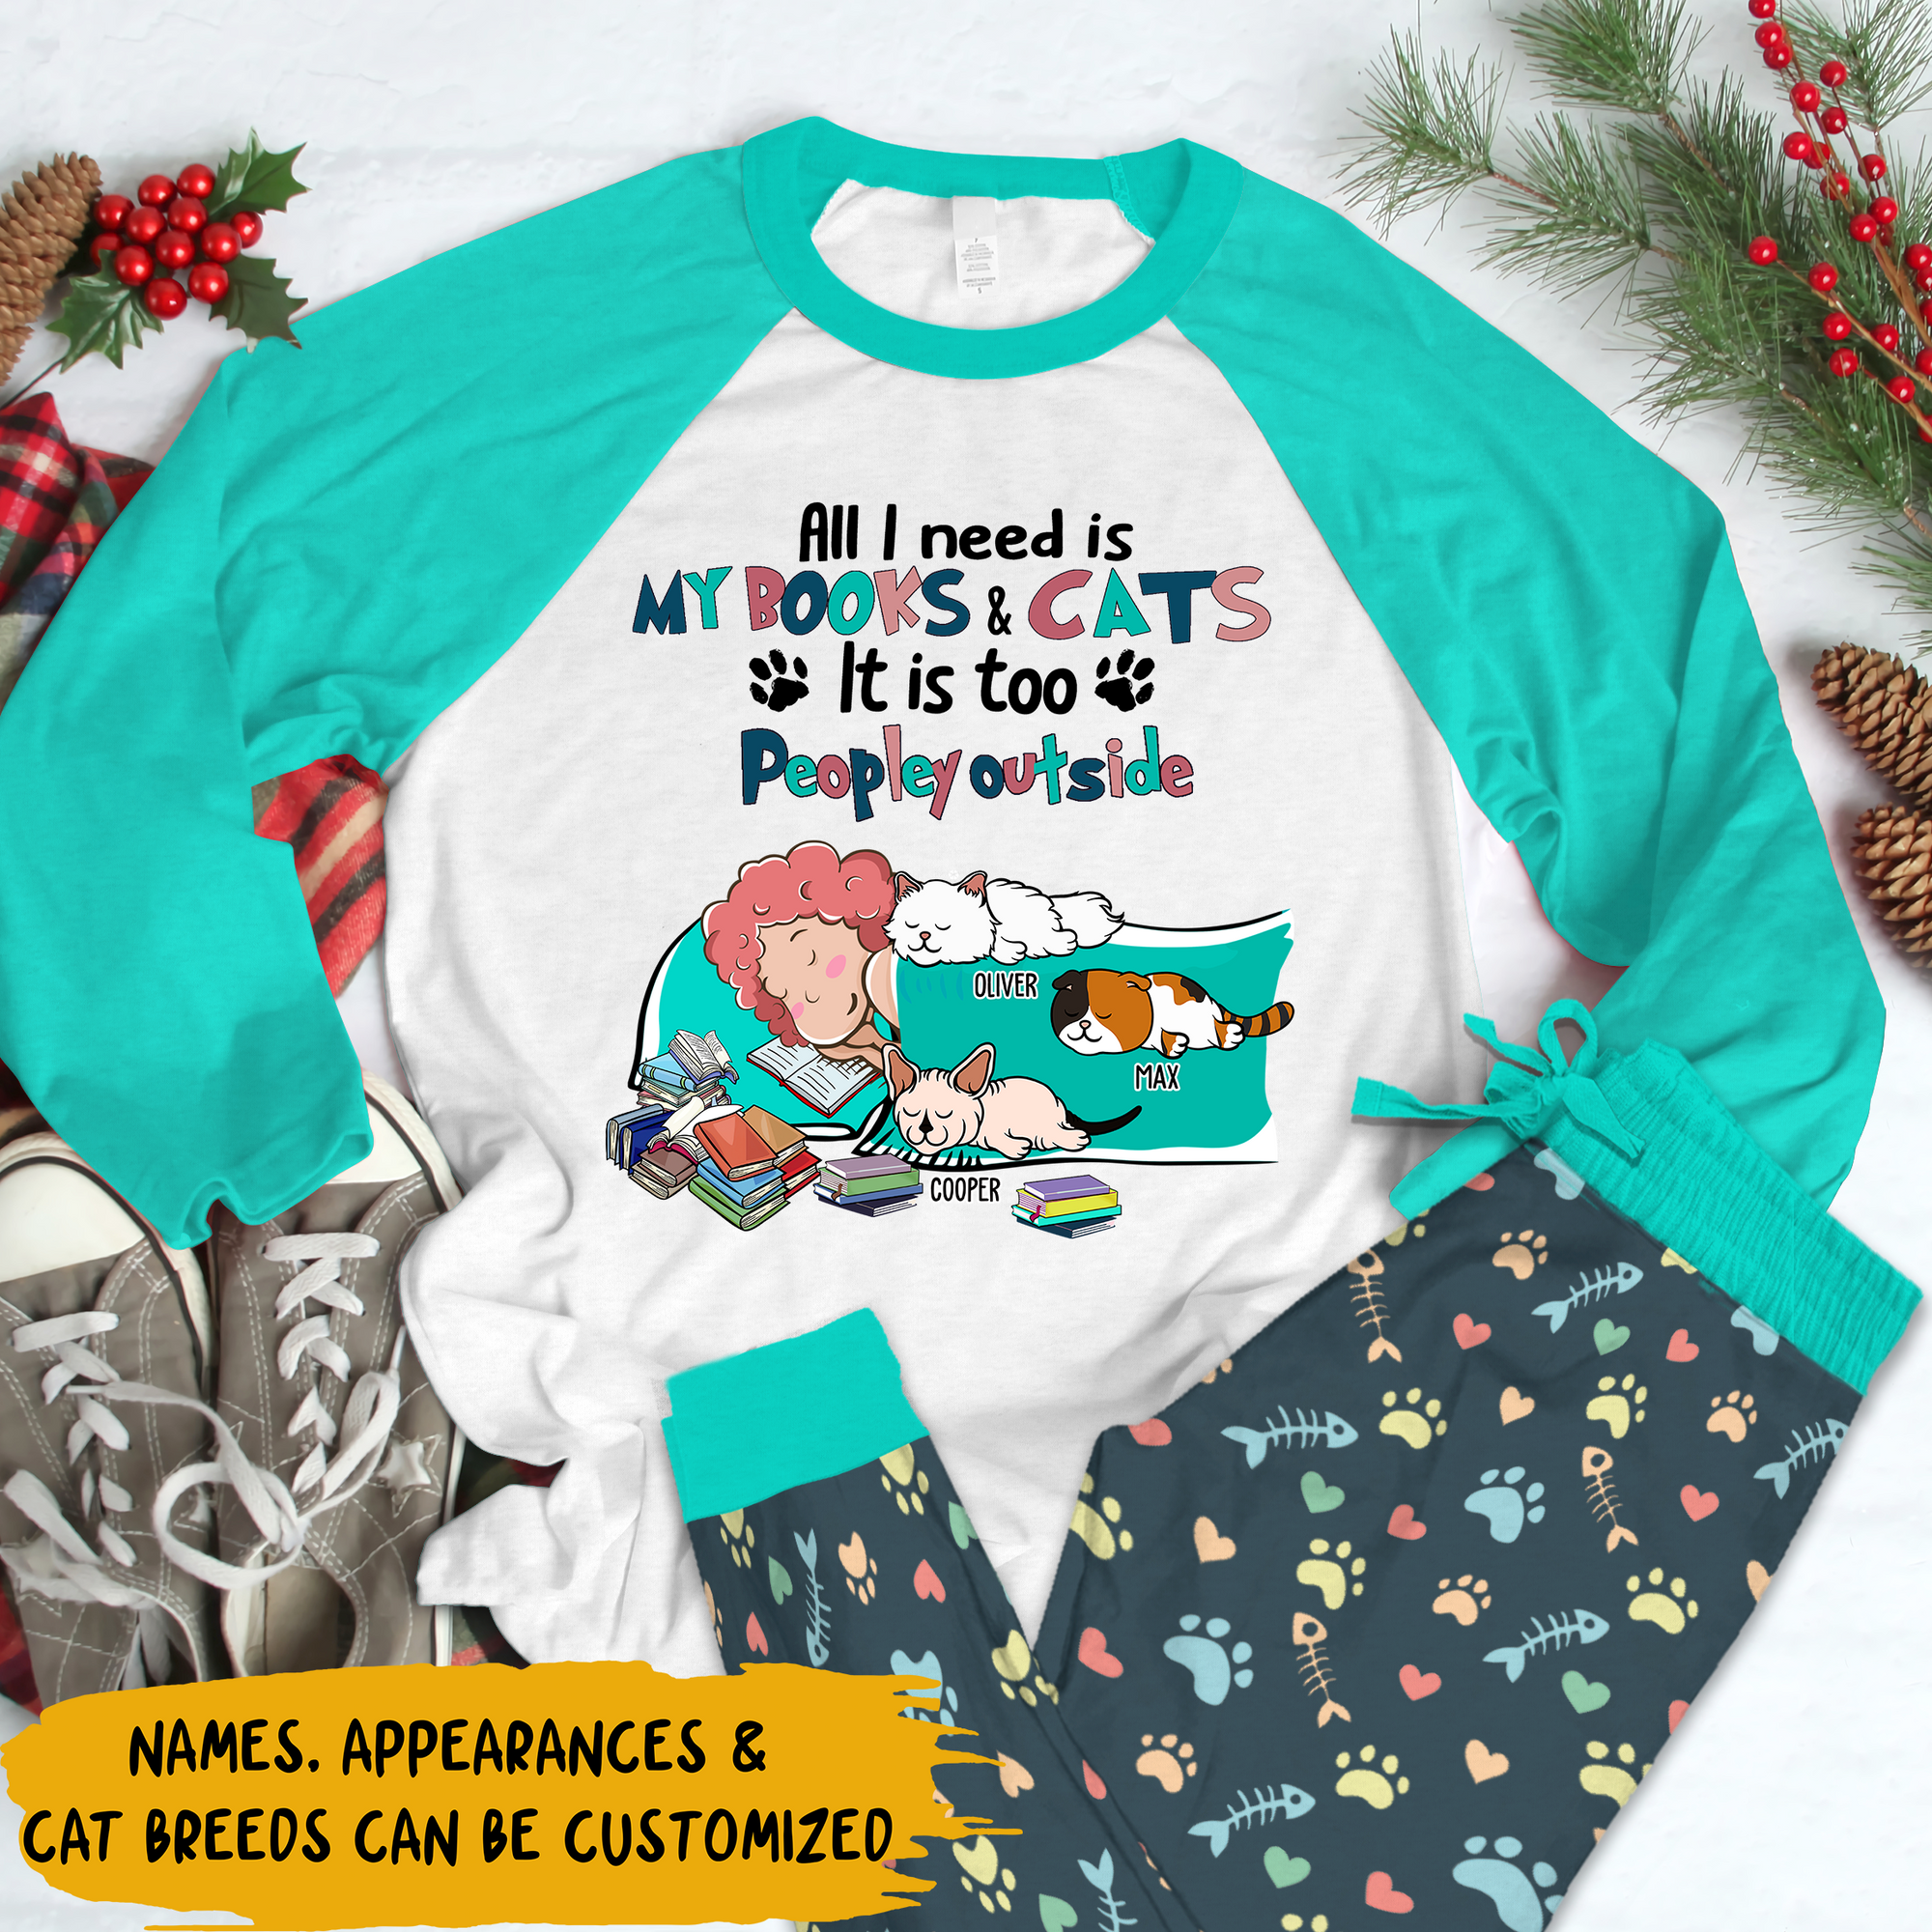 Personalized Pajama Set - Gift For Reading & Cat Lovers - All I Need Is My Books & Cats